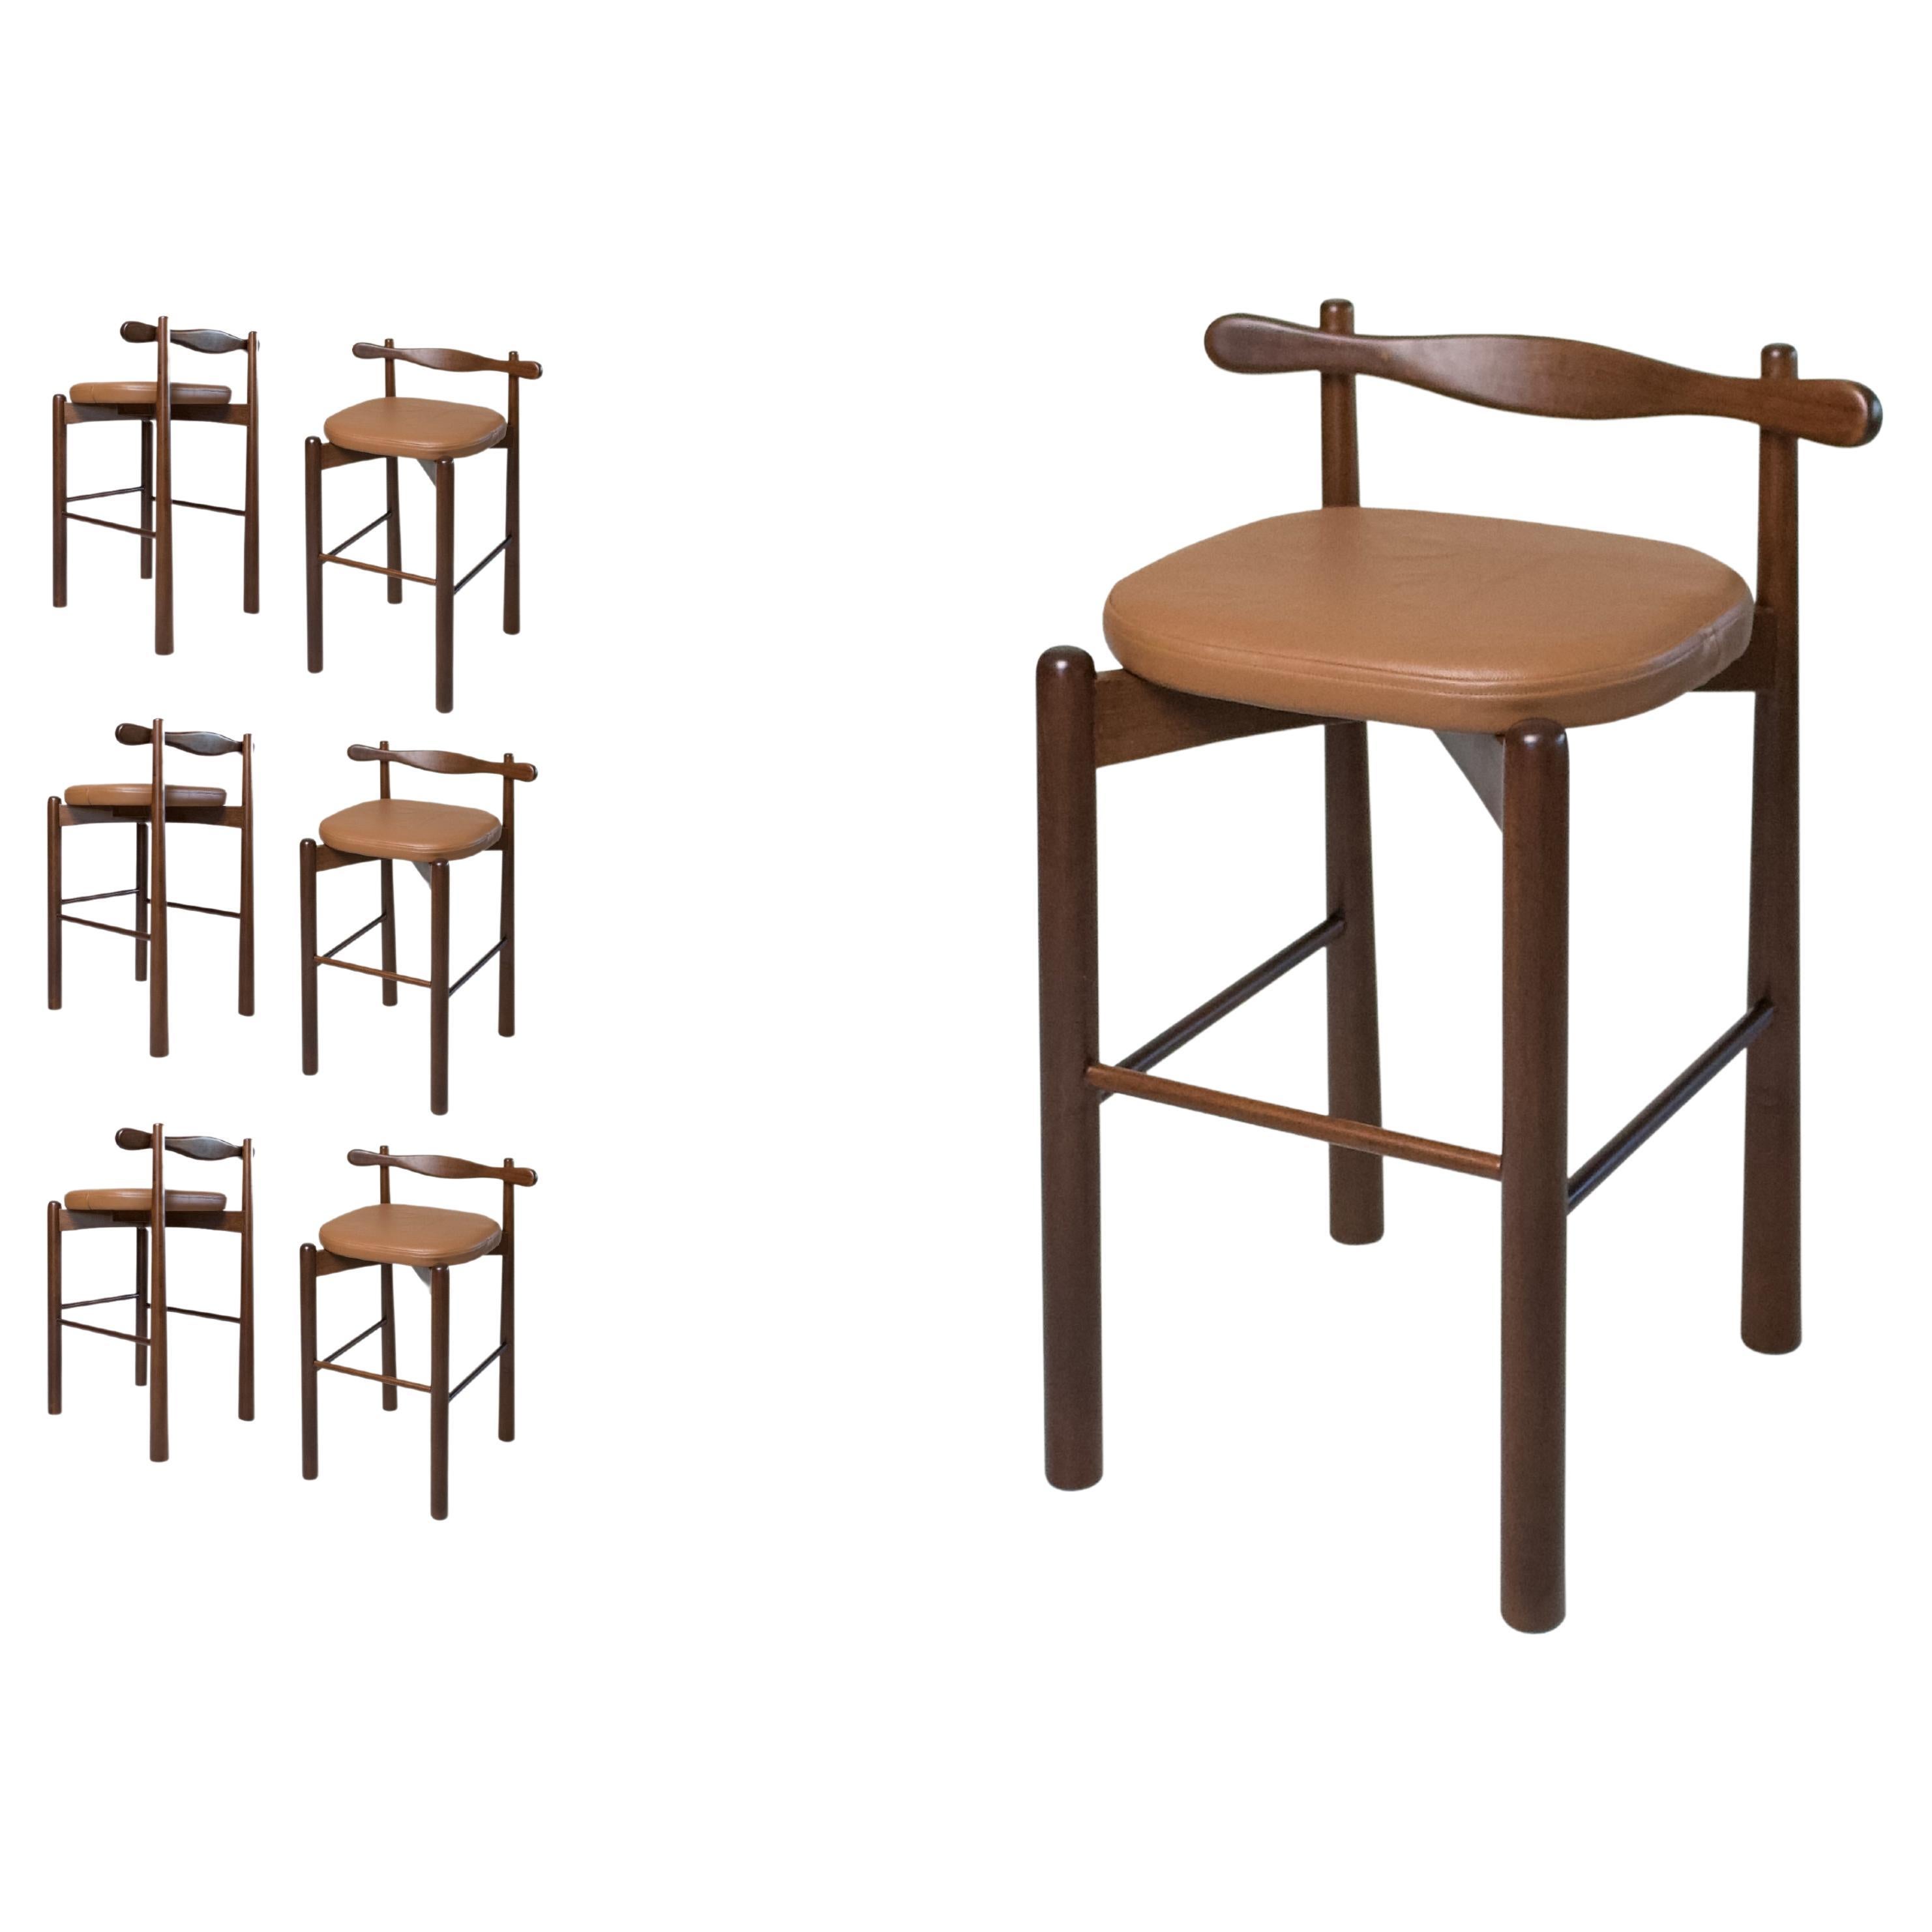 Set of 6 Counter Stools Uçá - Dark Brown Wood (fabric ref : F08) For Sale